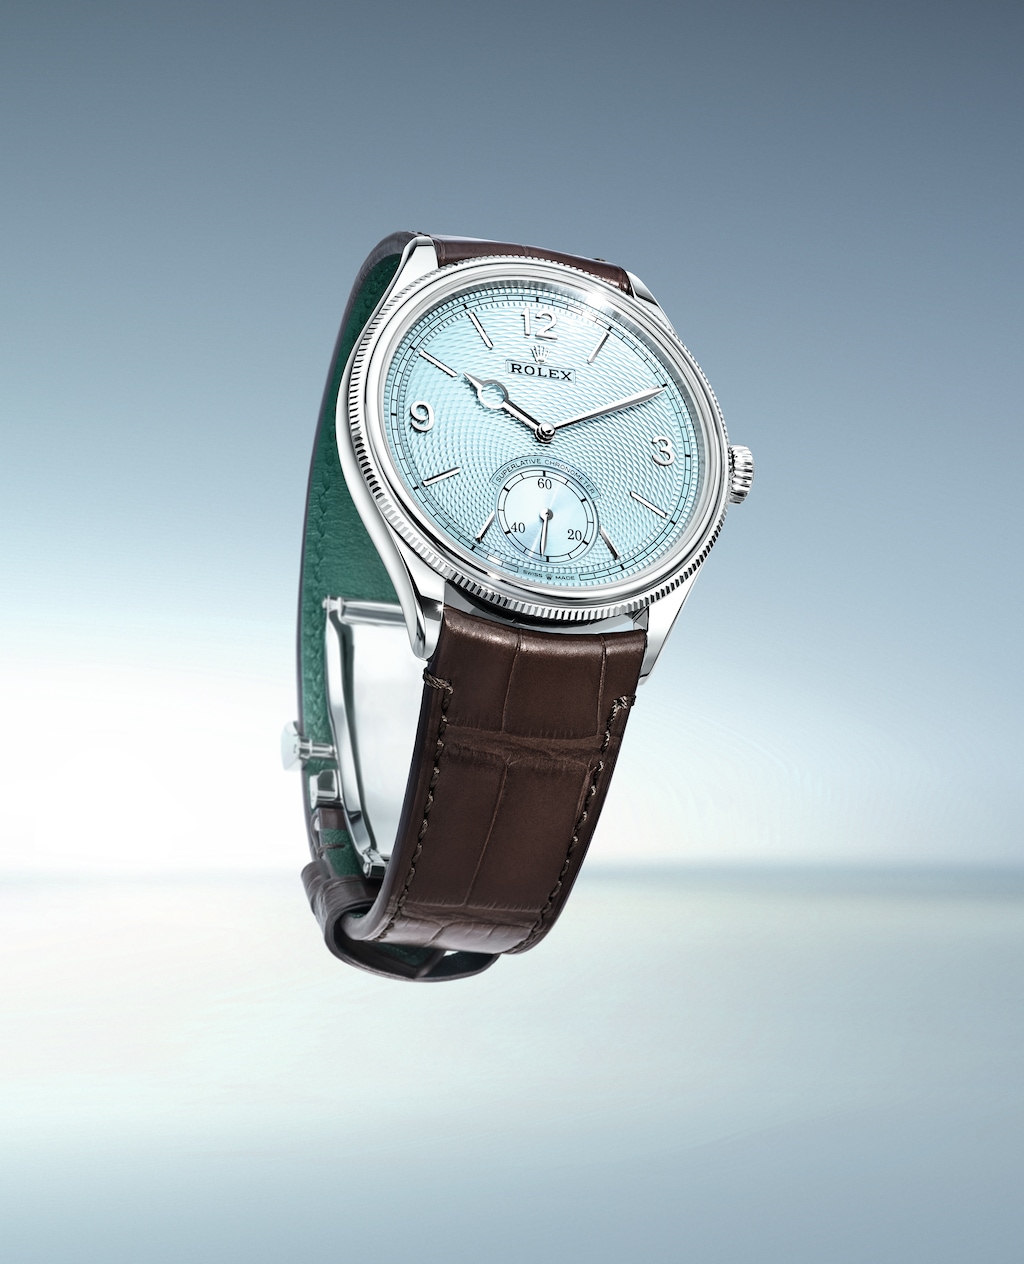 Back in Platinum and Blue, Meet the Latest Rolex Perpetual 1908